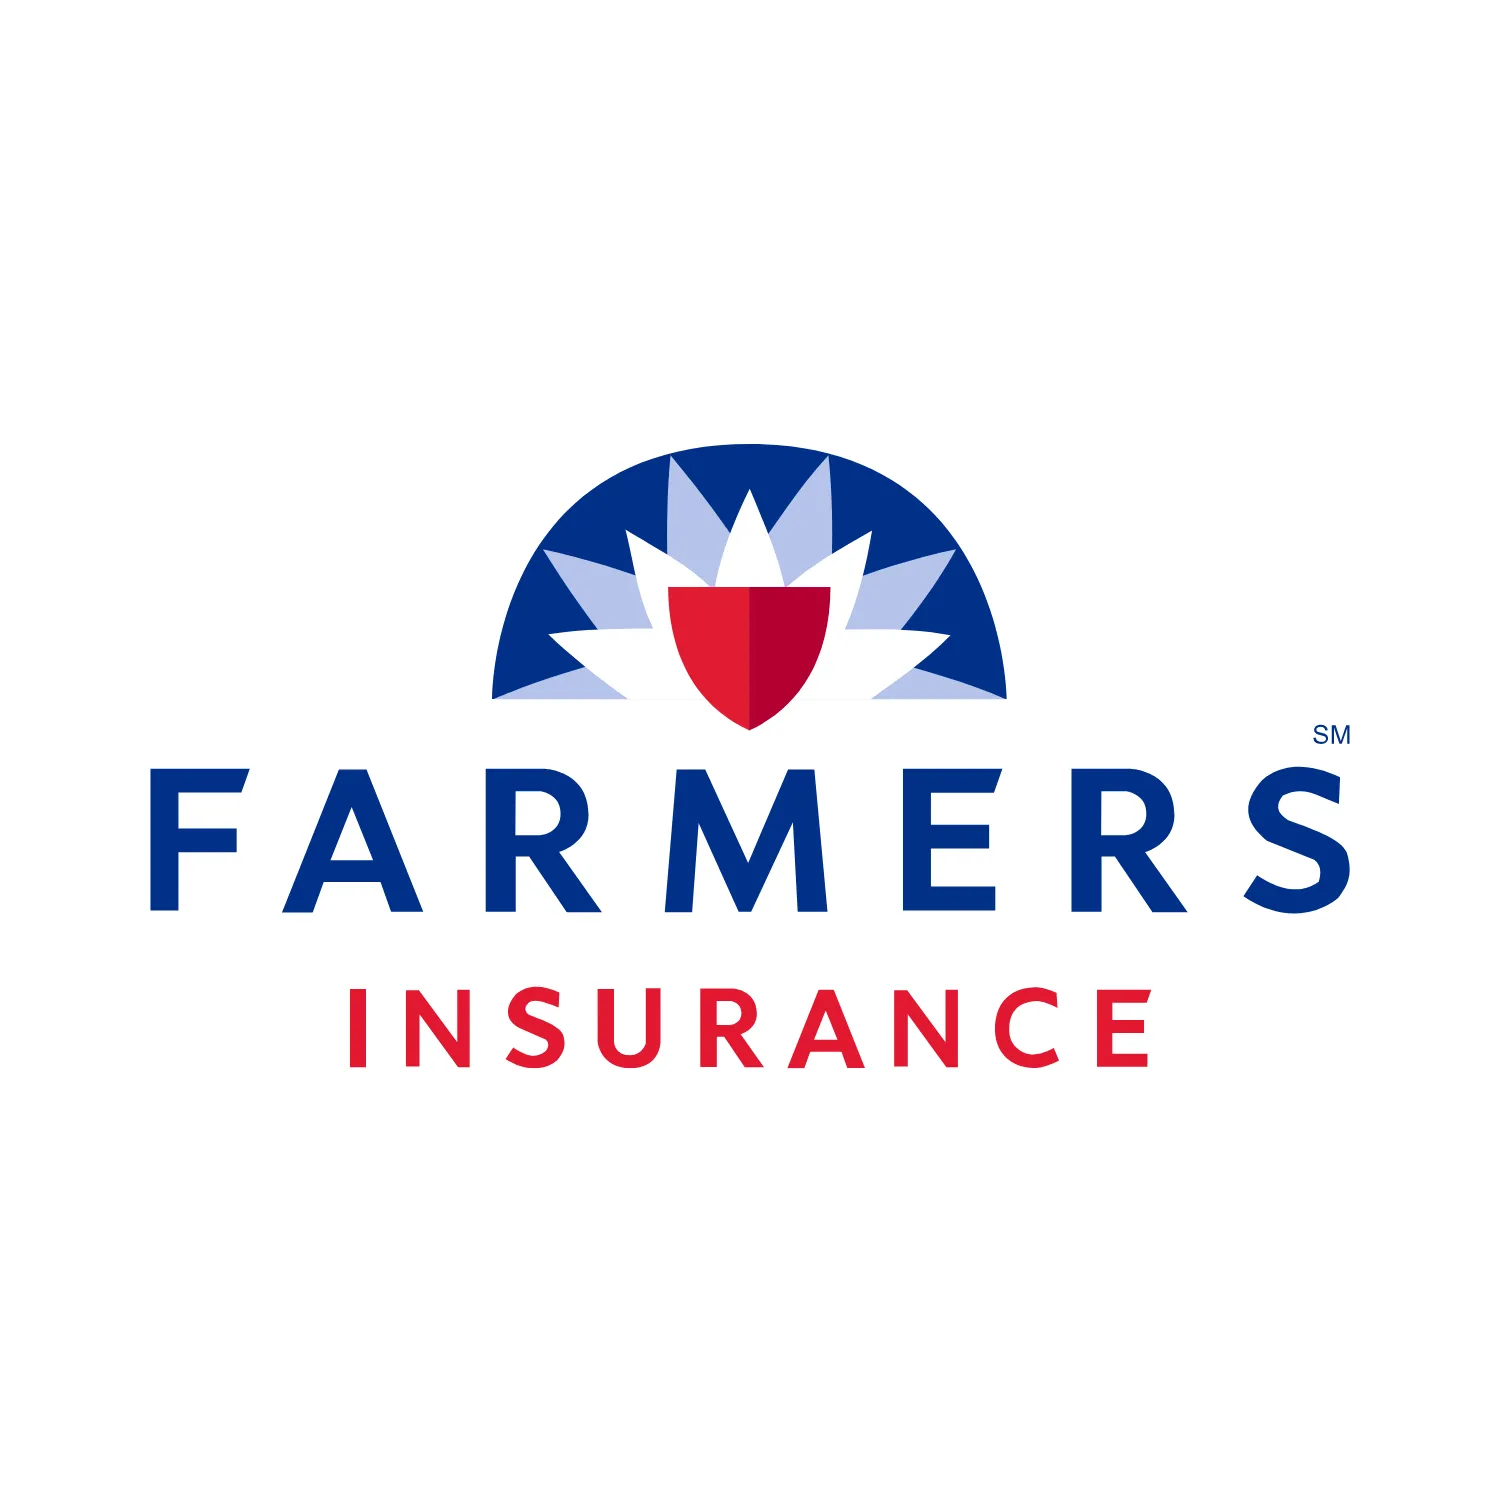 Database of Farmers Insurance Agents Locations in the United States